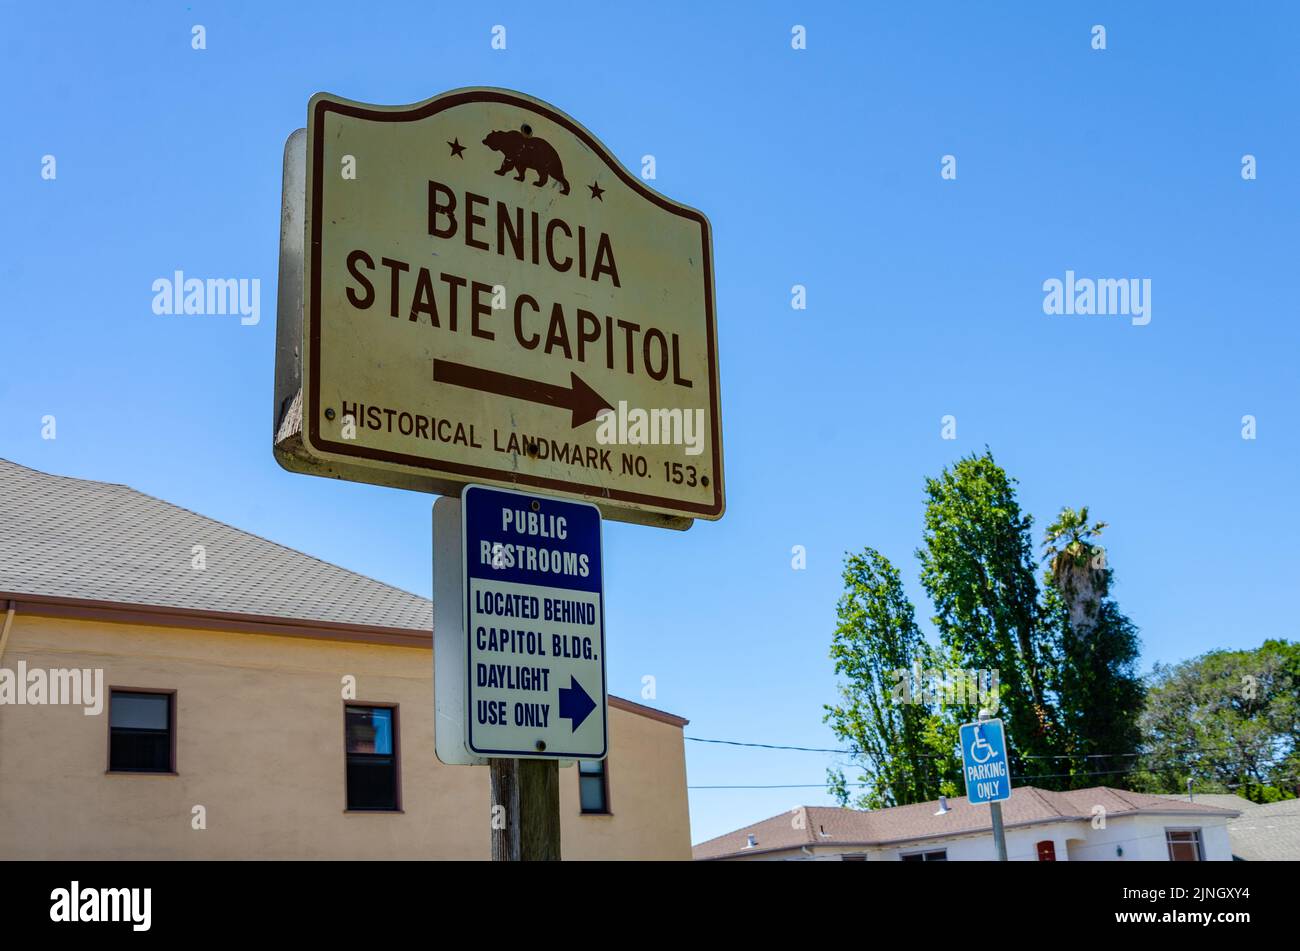 A sign giving directions to The Benicia State Capitol in Benicia, California, USA Stock Photo